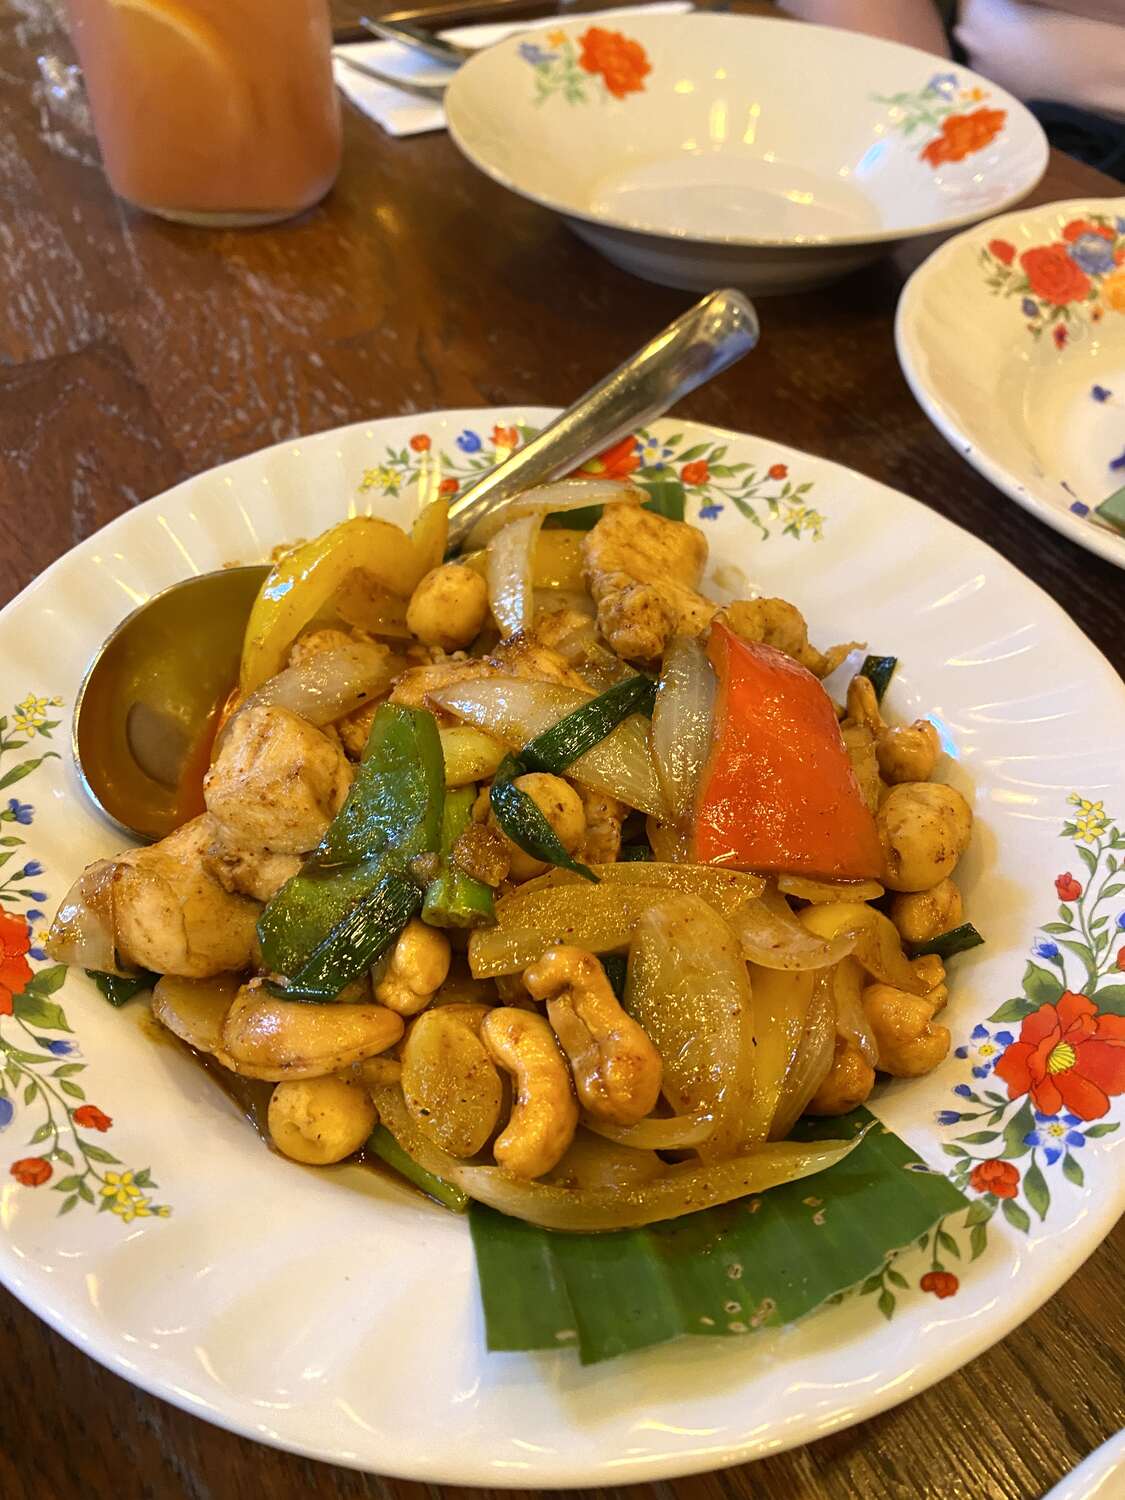 Dinner at Ginger Farm Kitchen with chicken and cashew nuts